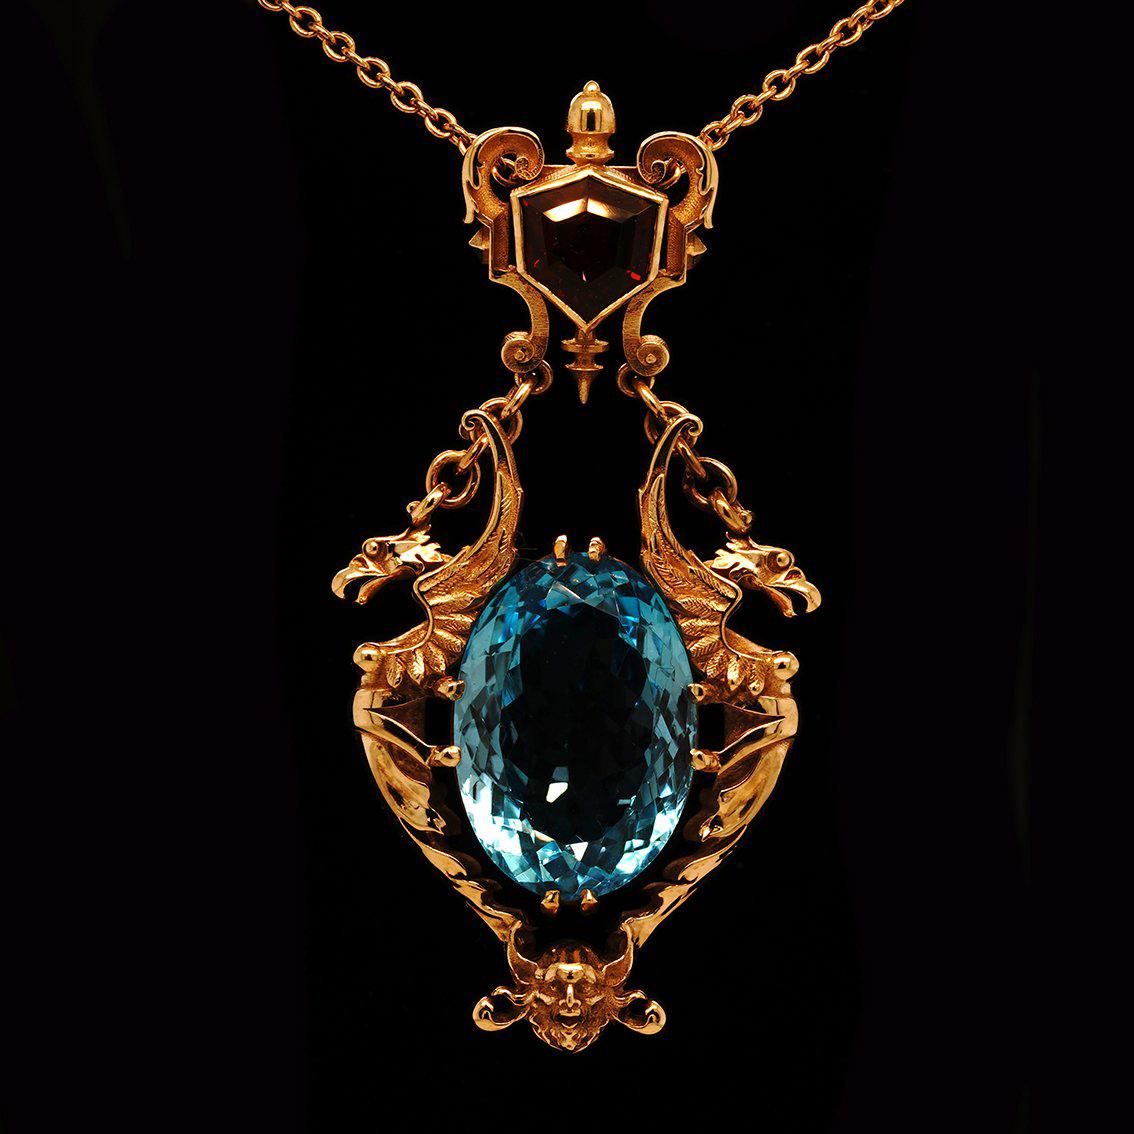 28ct Oval Swiss Blue Topaz, Garnet 9k Yellow Gold Antique Style Pendant Necklace For Sale 7